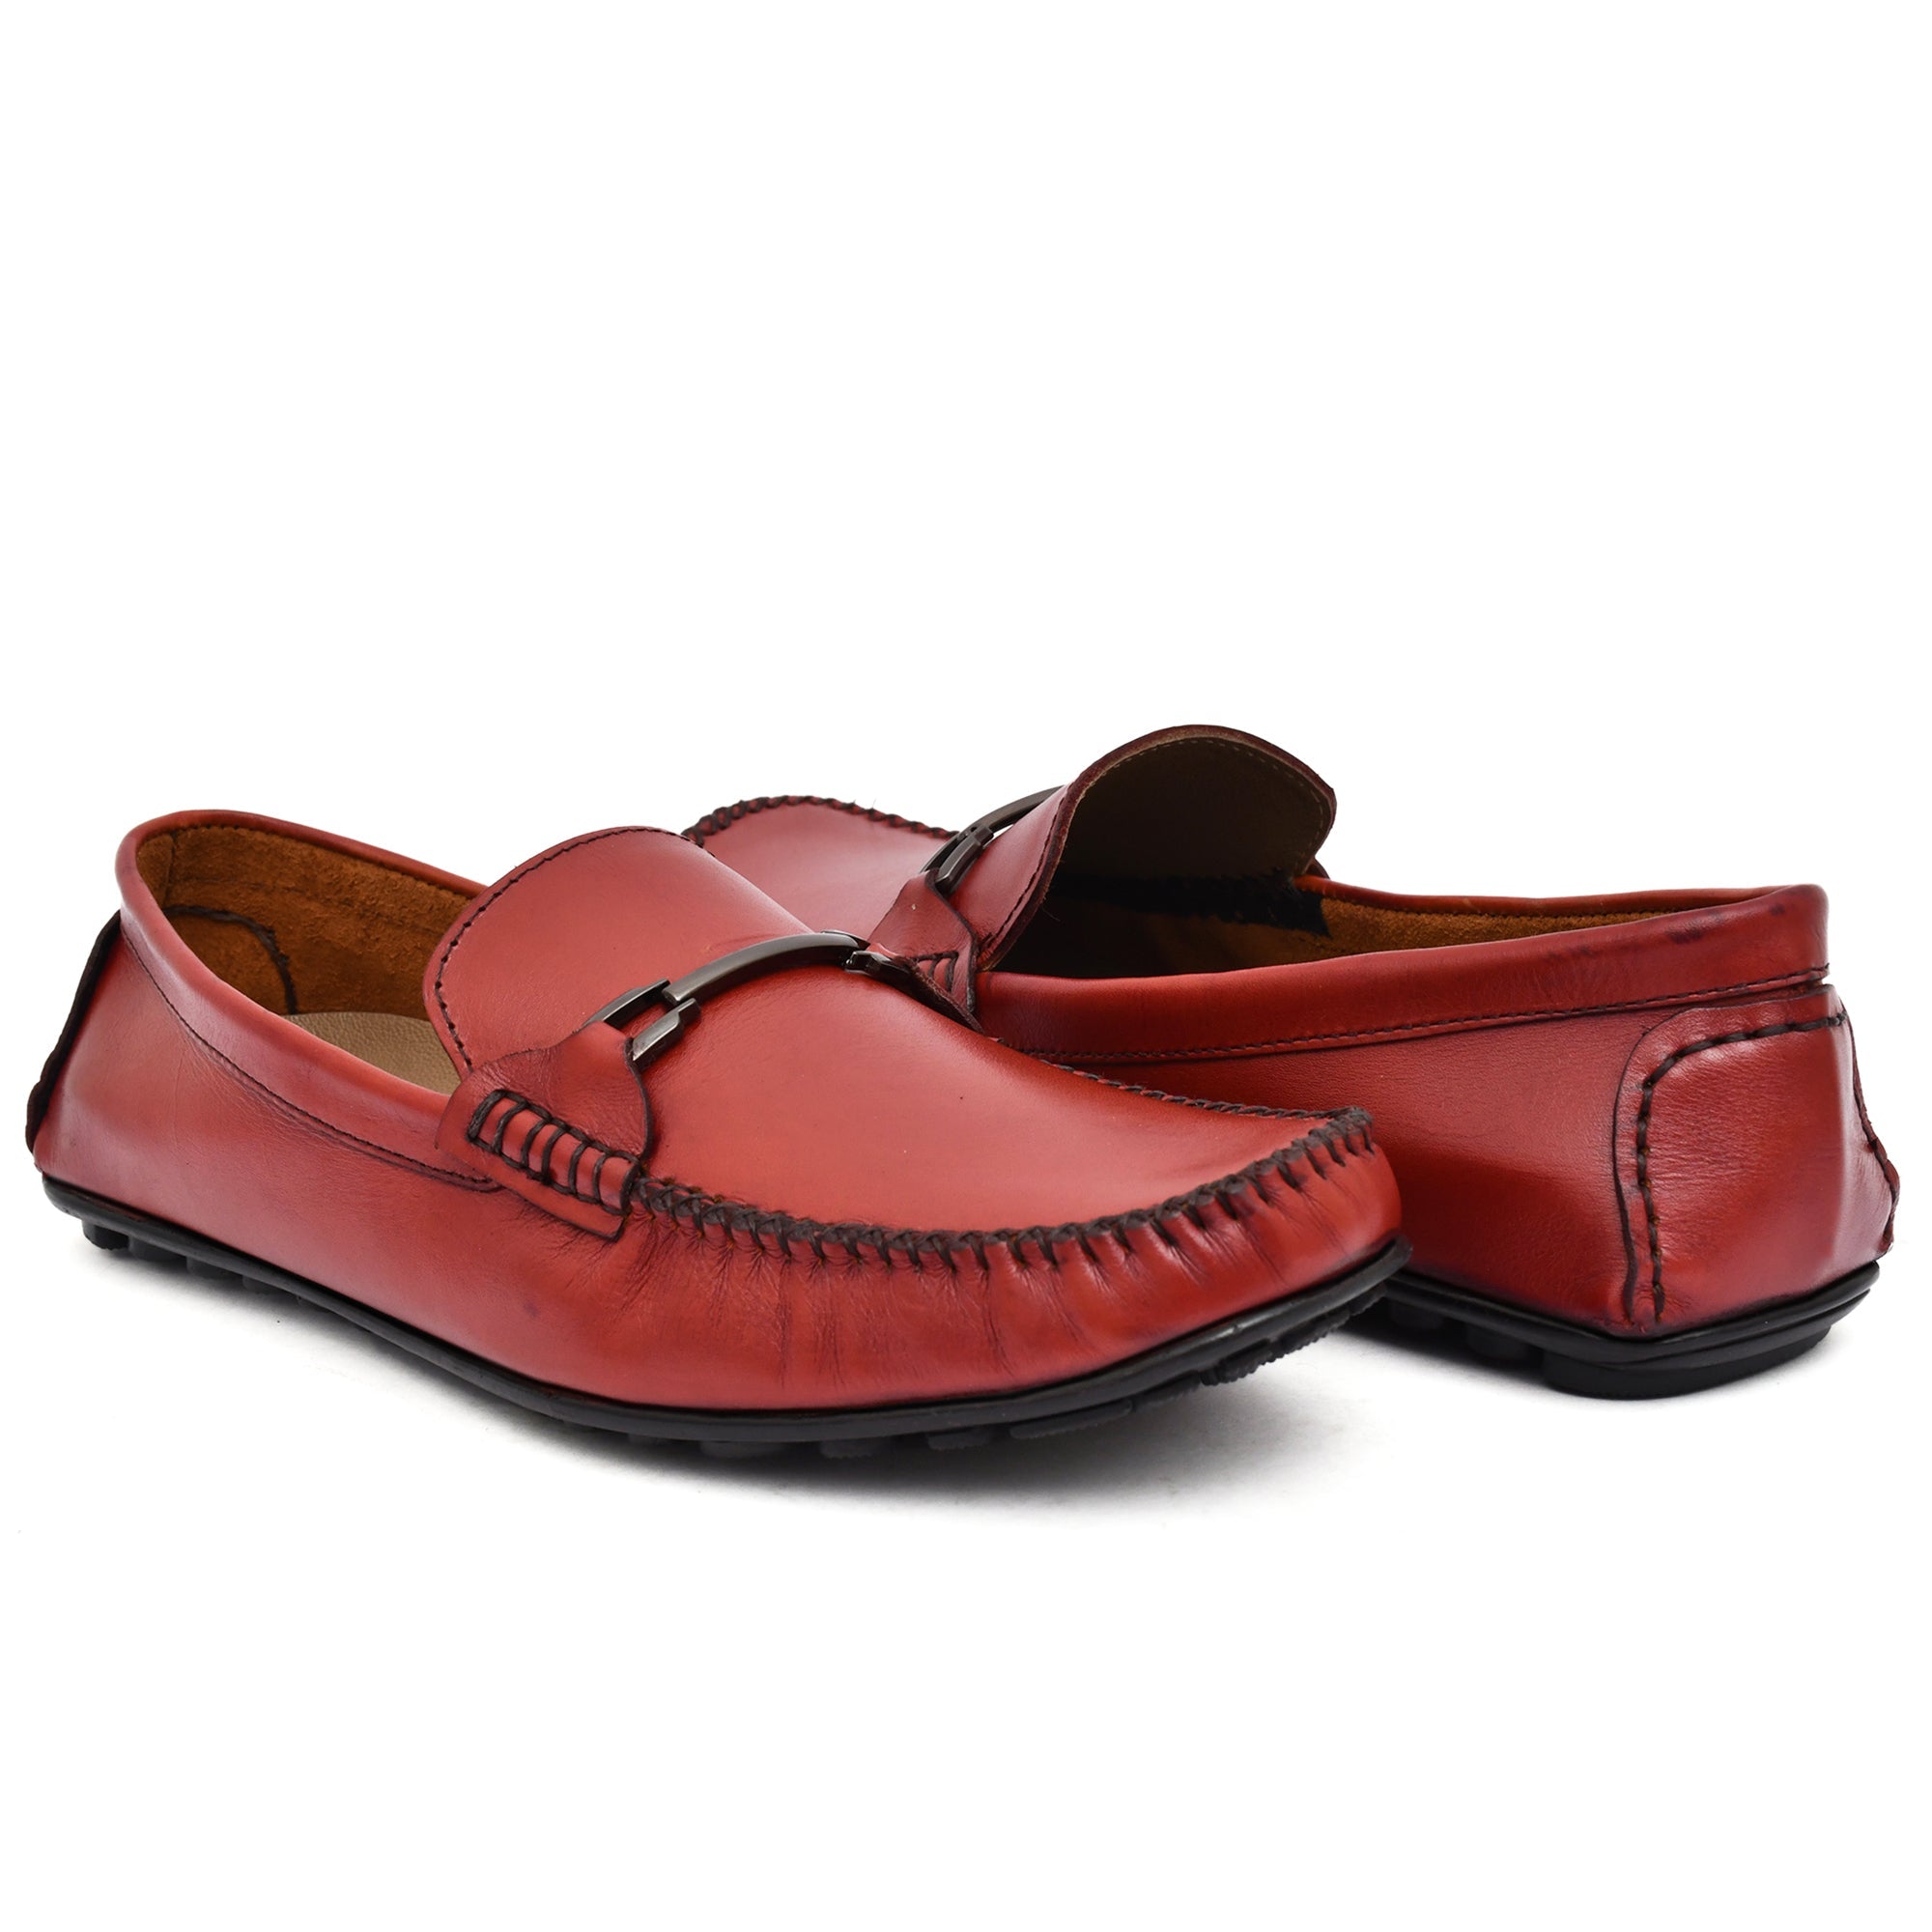 Buckled Leather Loafers for men's countrymaddox